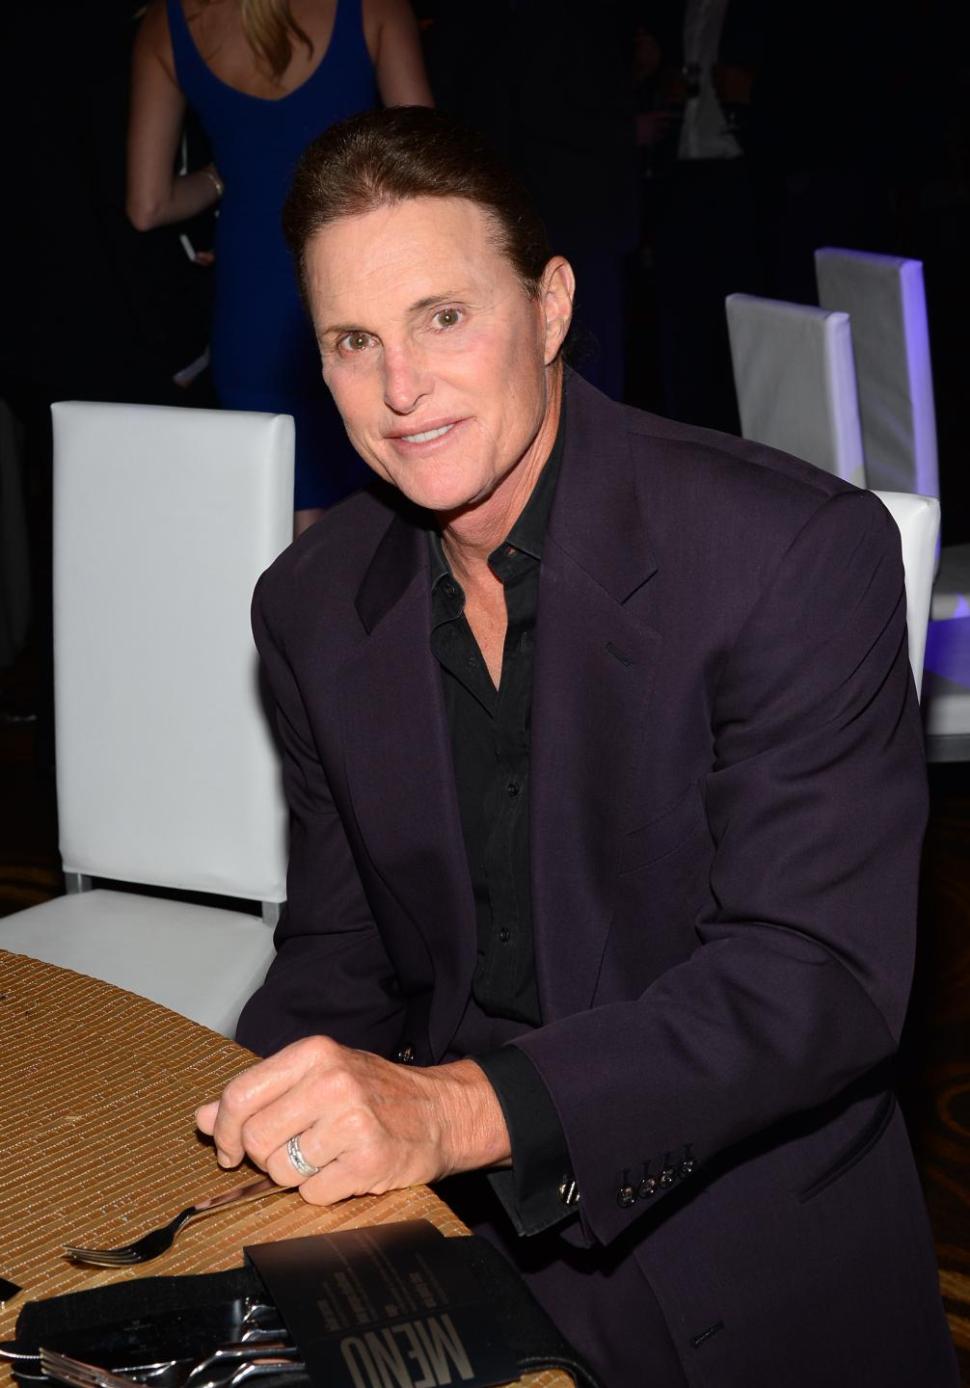 Bruce Jenner (above) will talk about his "journey" when he's ready, says Kim Kardashian.